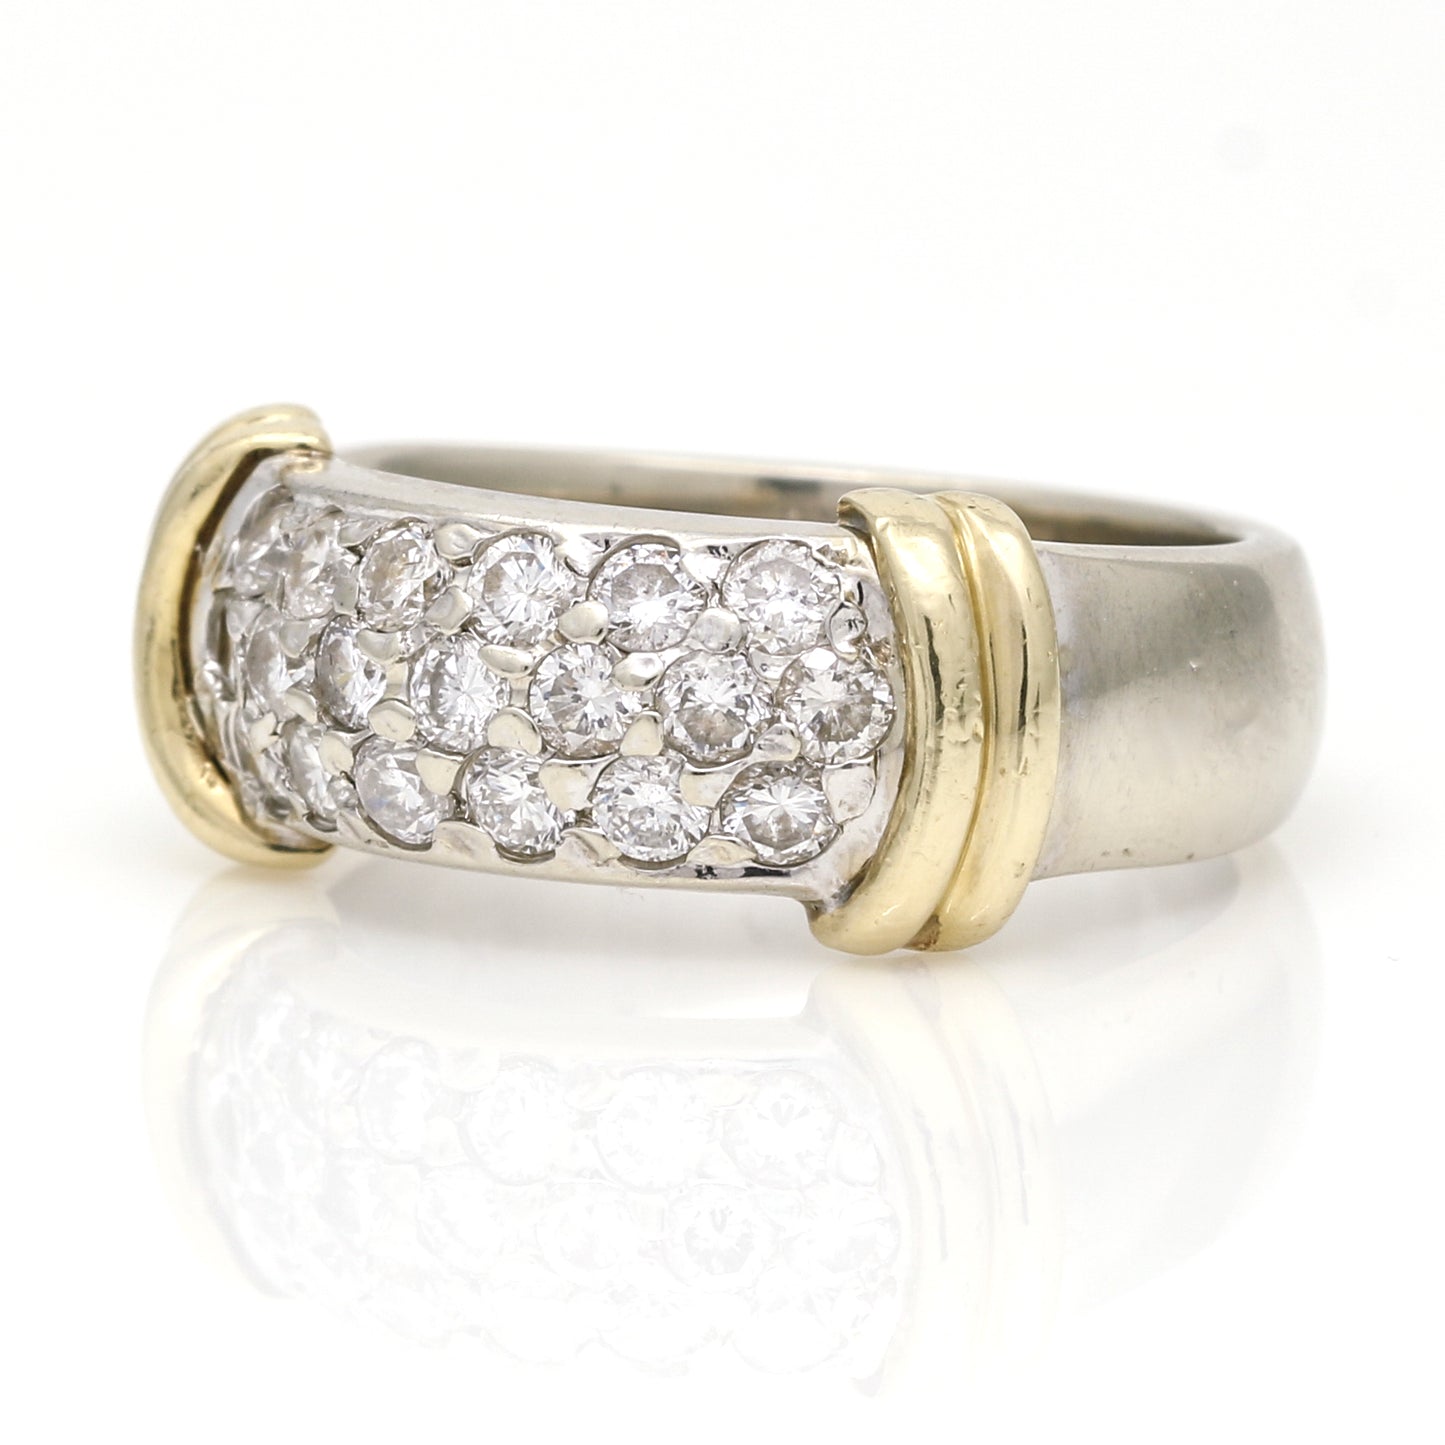 Women's Pave Diamond Band Ring in 14k White and Yellow Gold